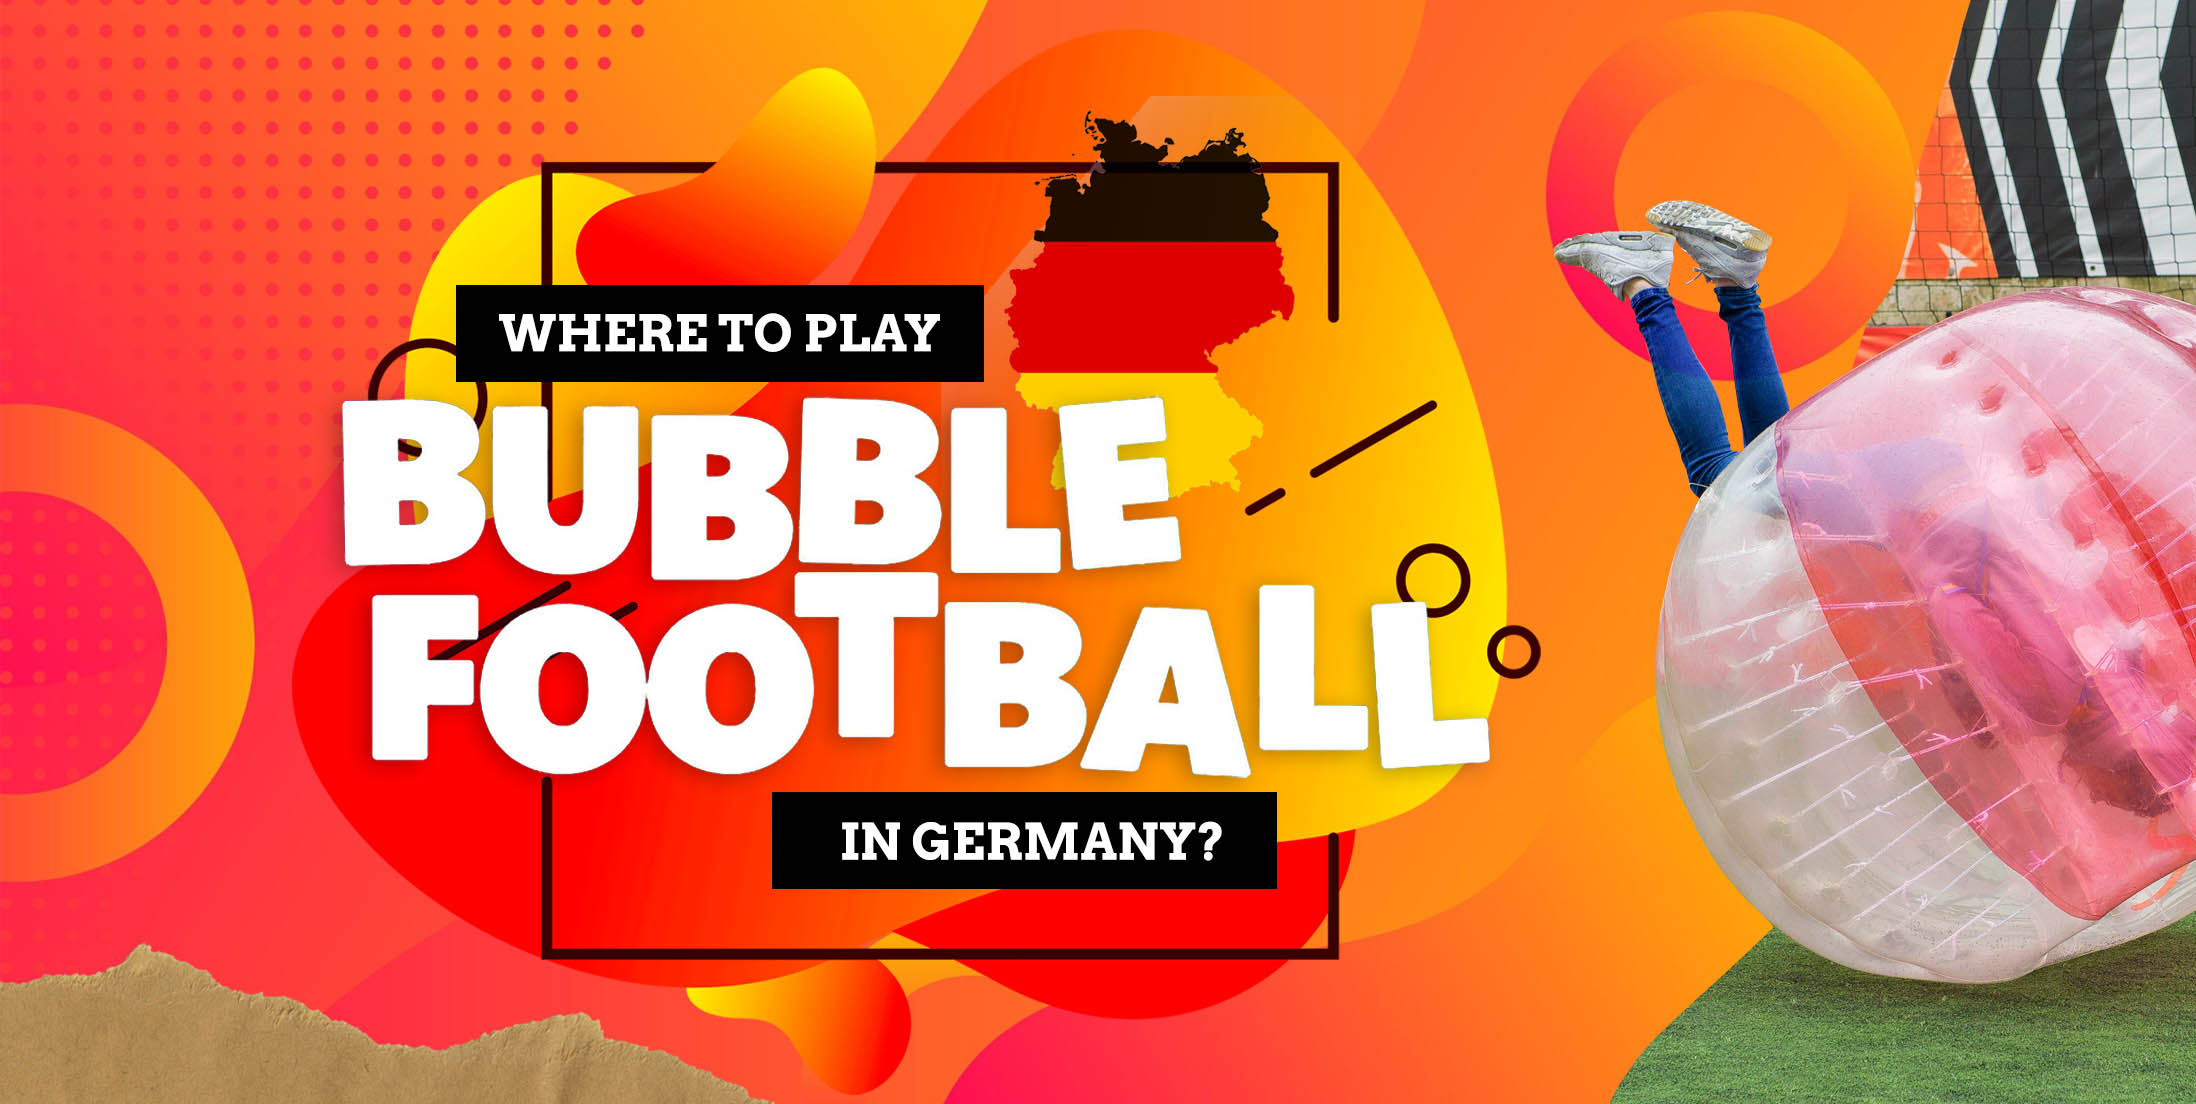 Where Can I Play Bubble Football in Germany?